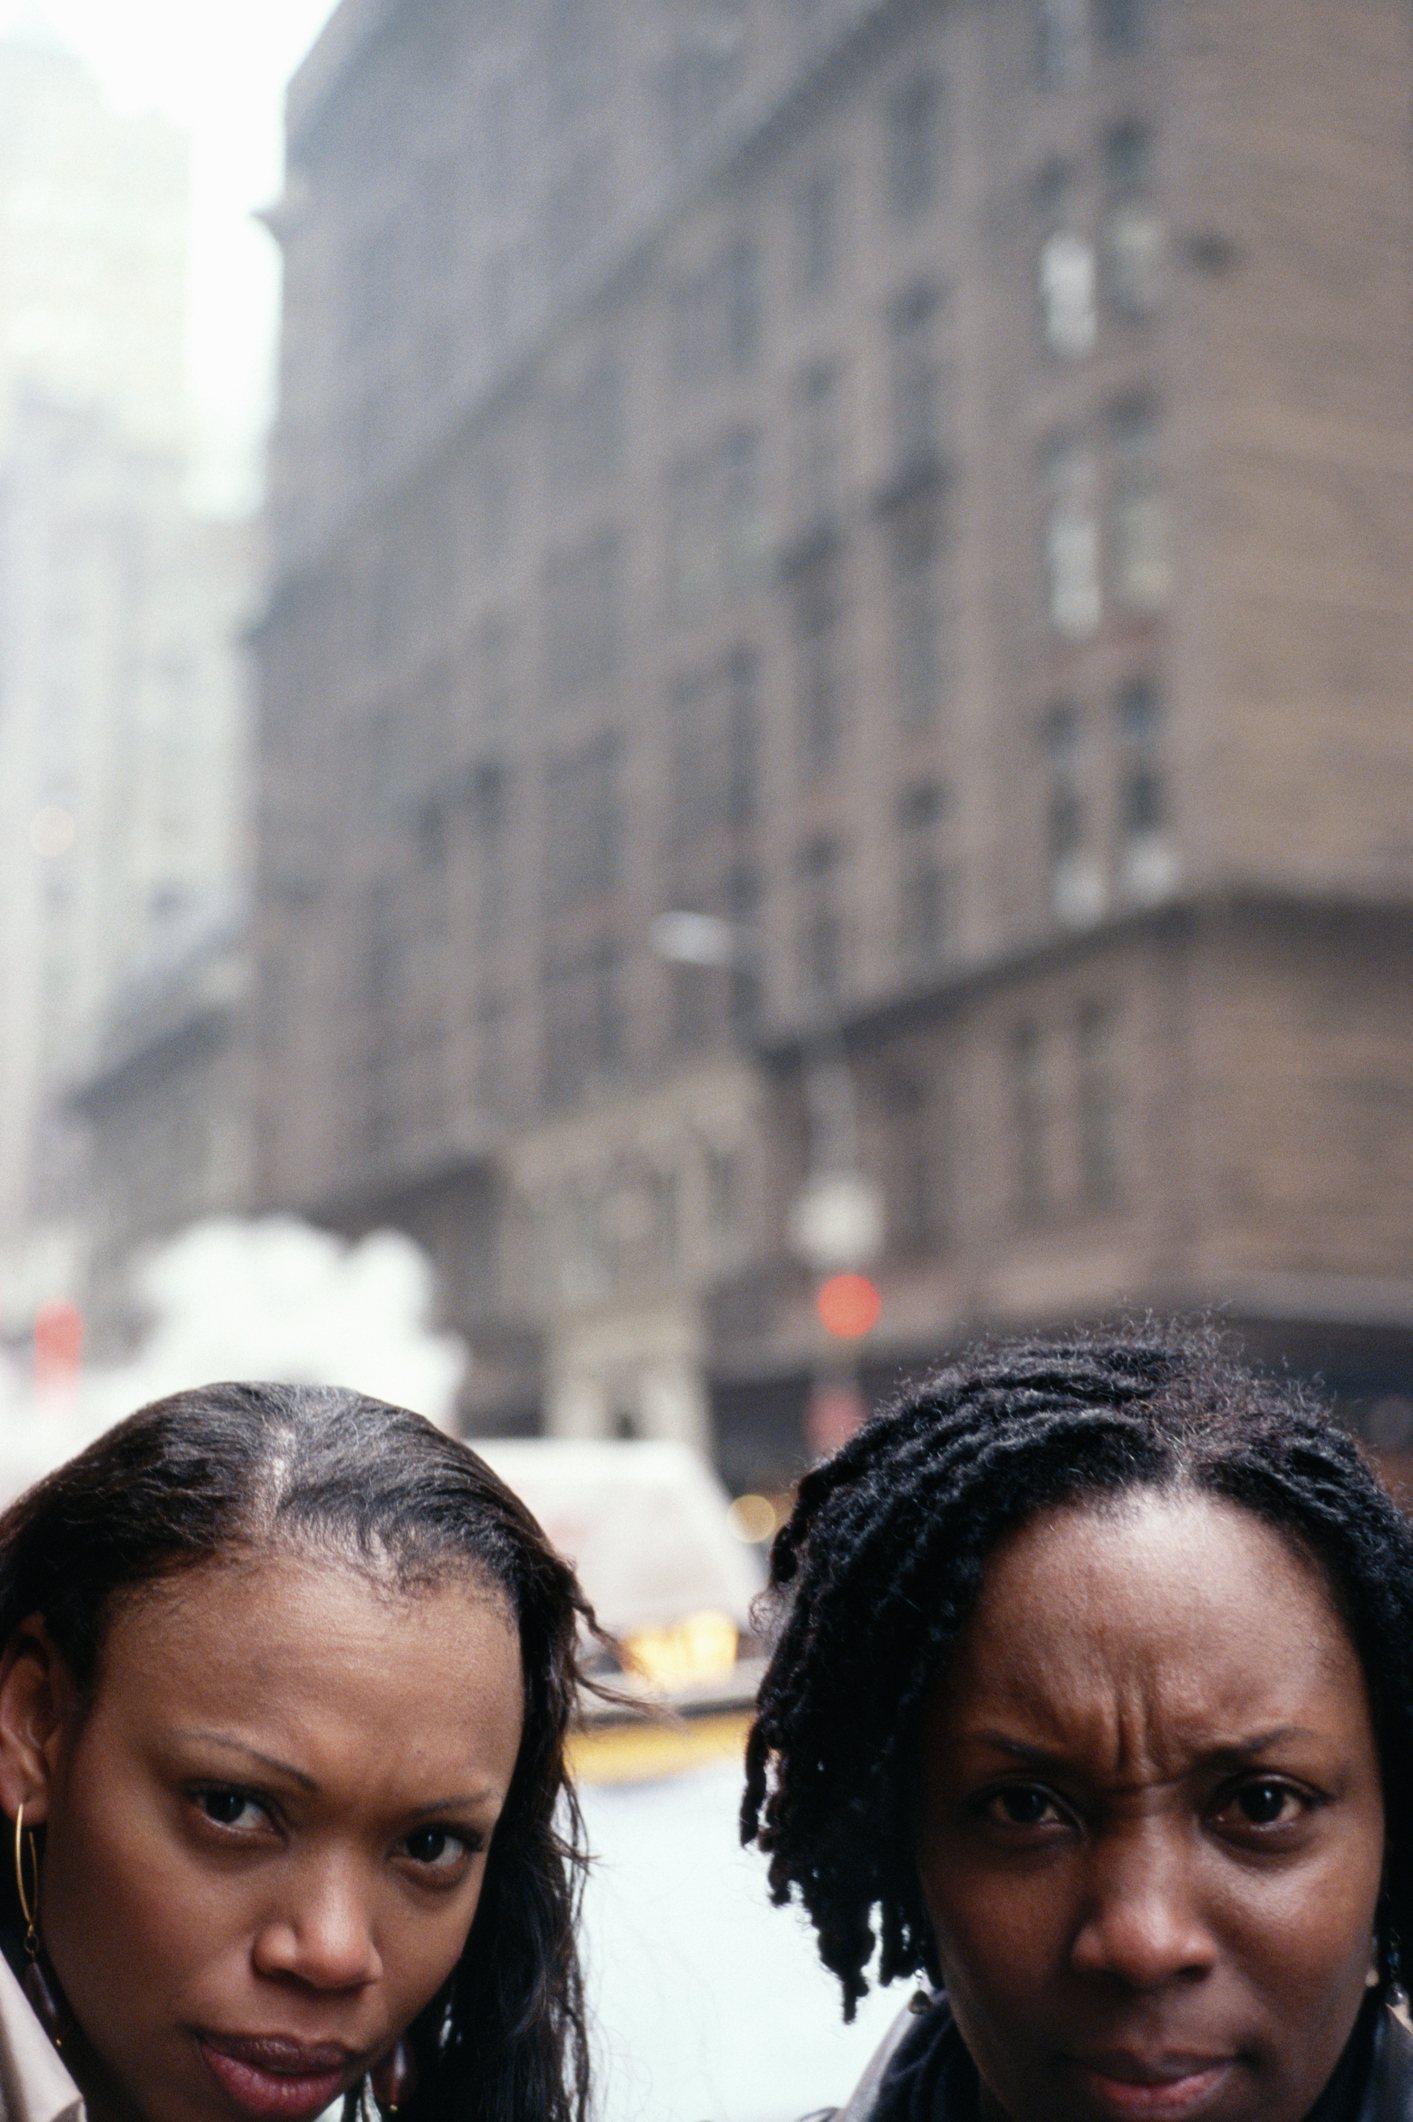 Two women in street, frowning, close-up, portrait